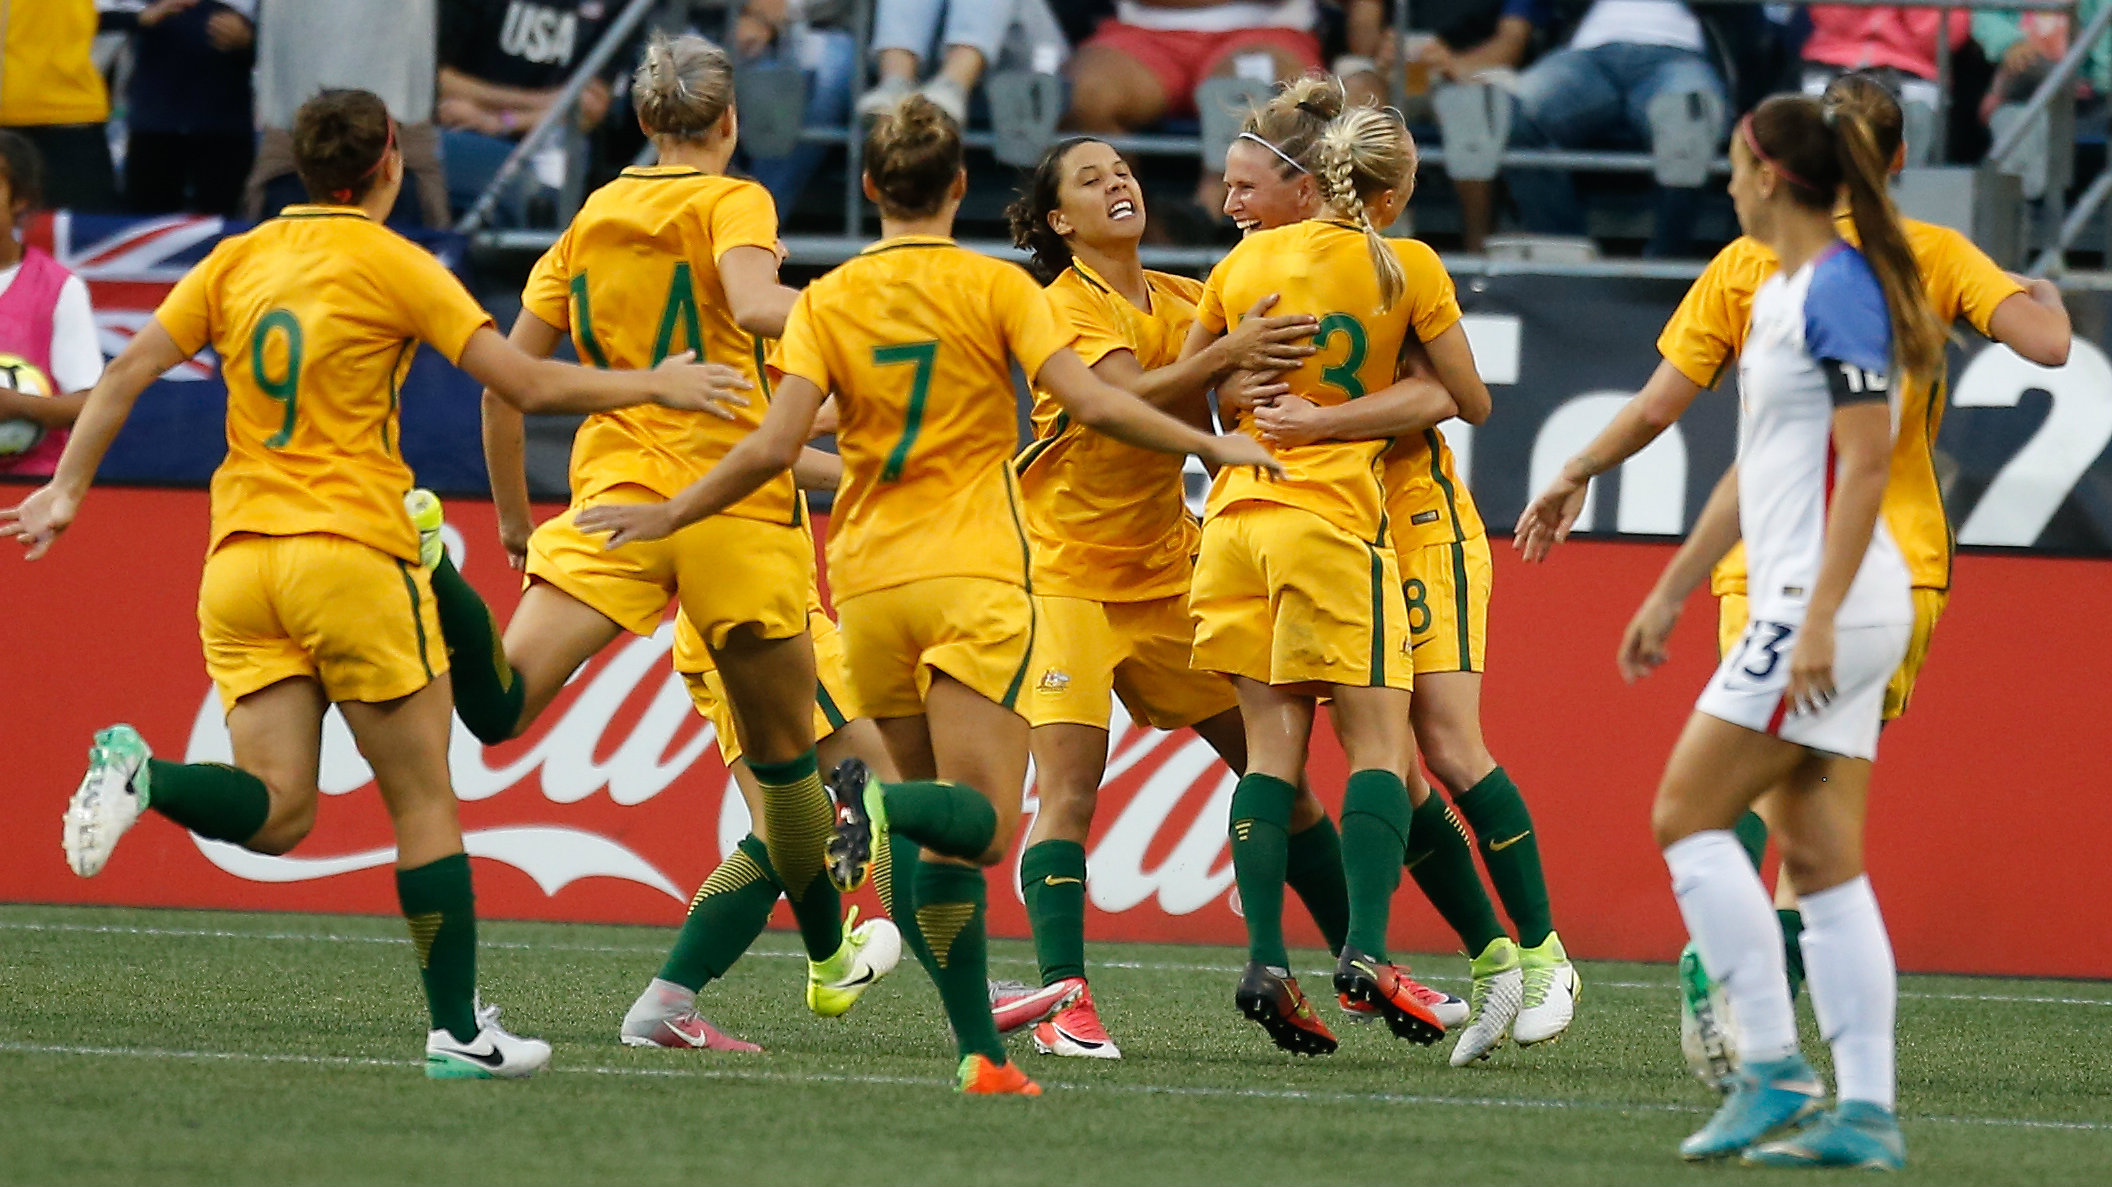 Westfield Matildas players celebrate Tameka Butt's goal in their win over the USA last month.